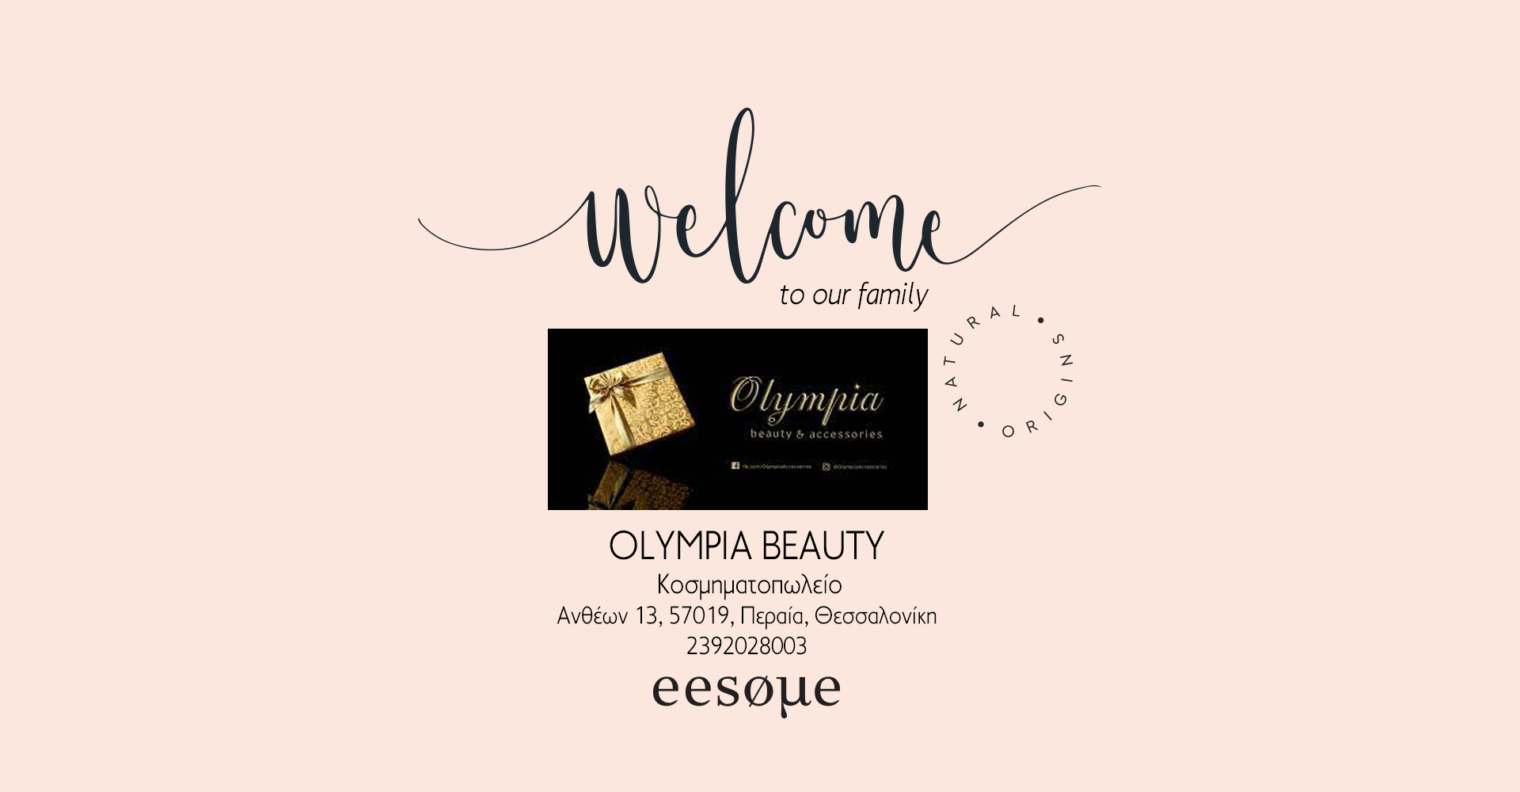 eesome post-olympiabeauty